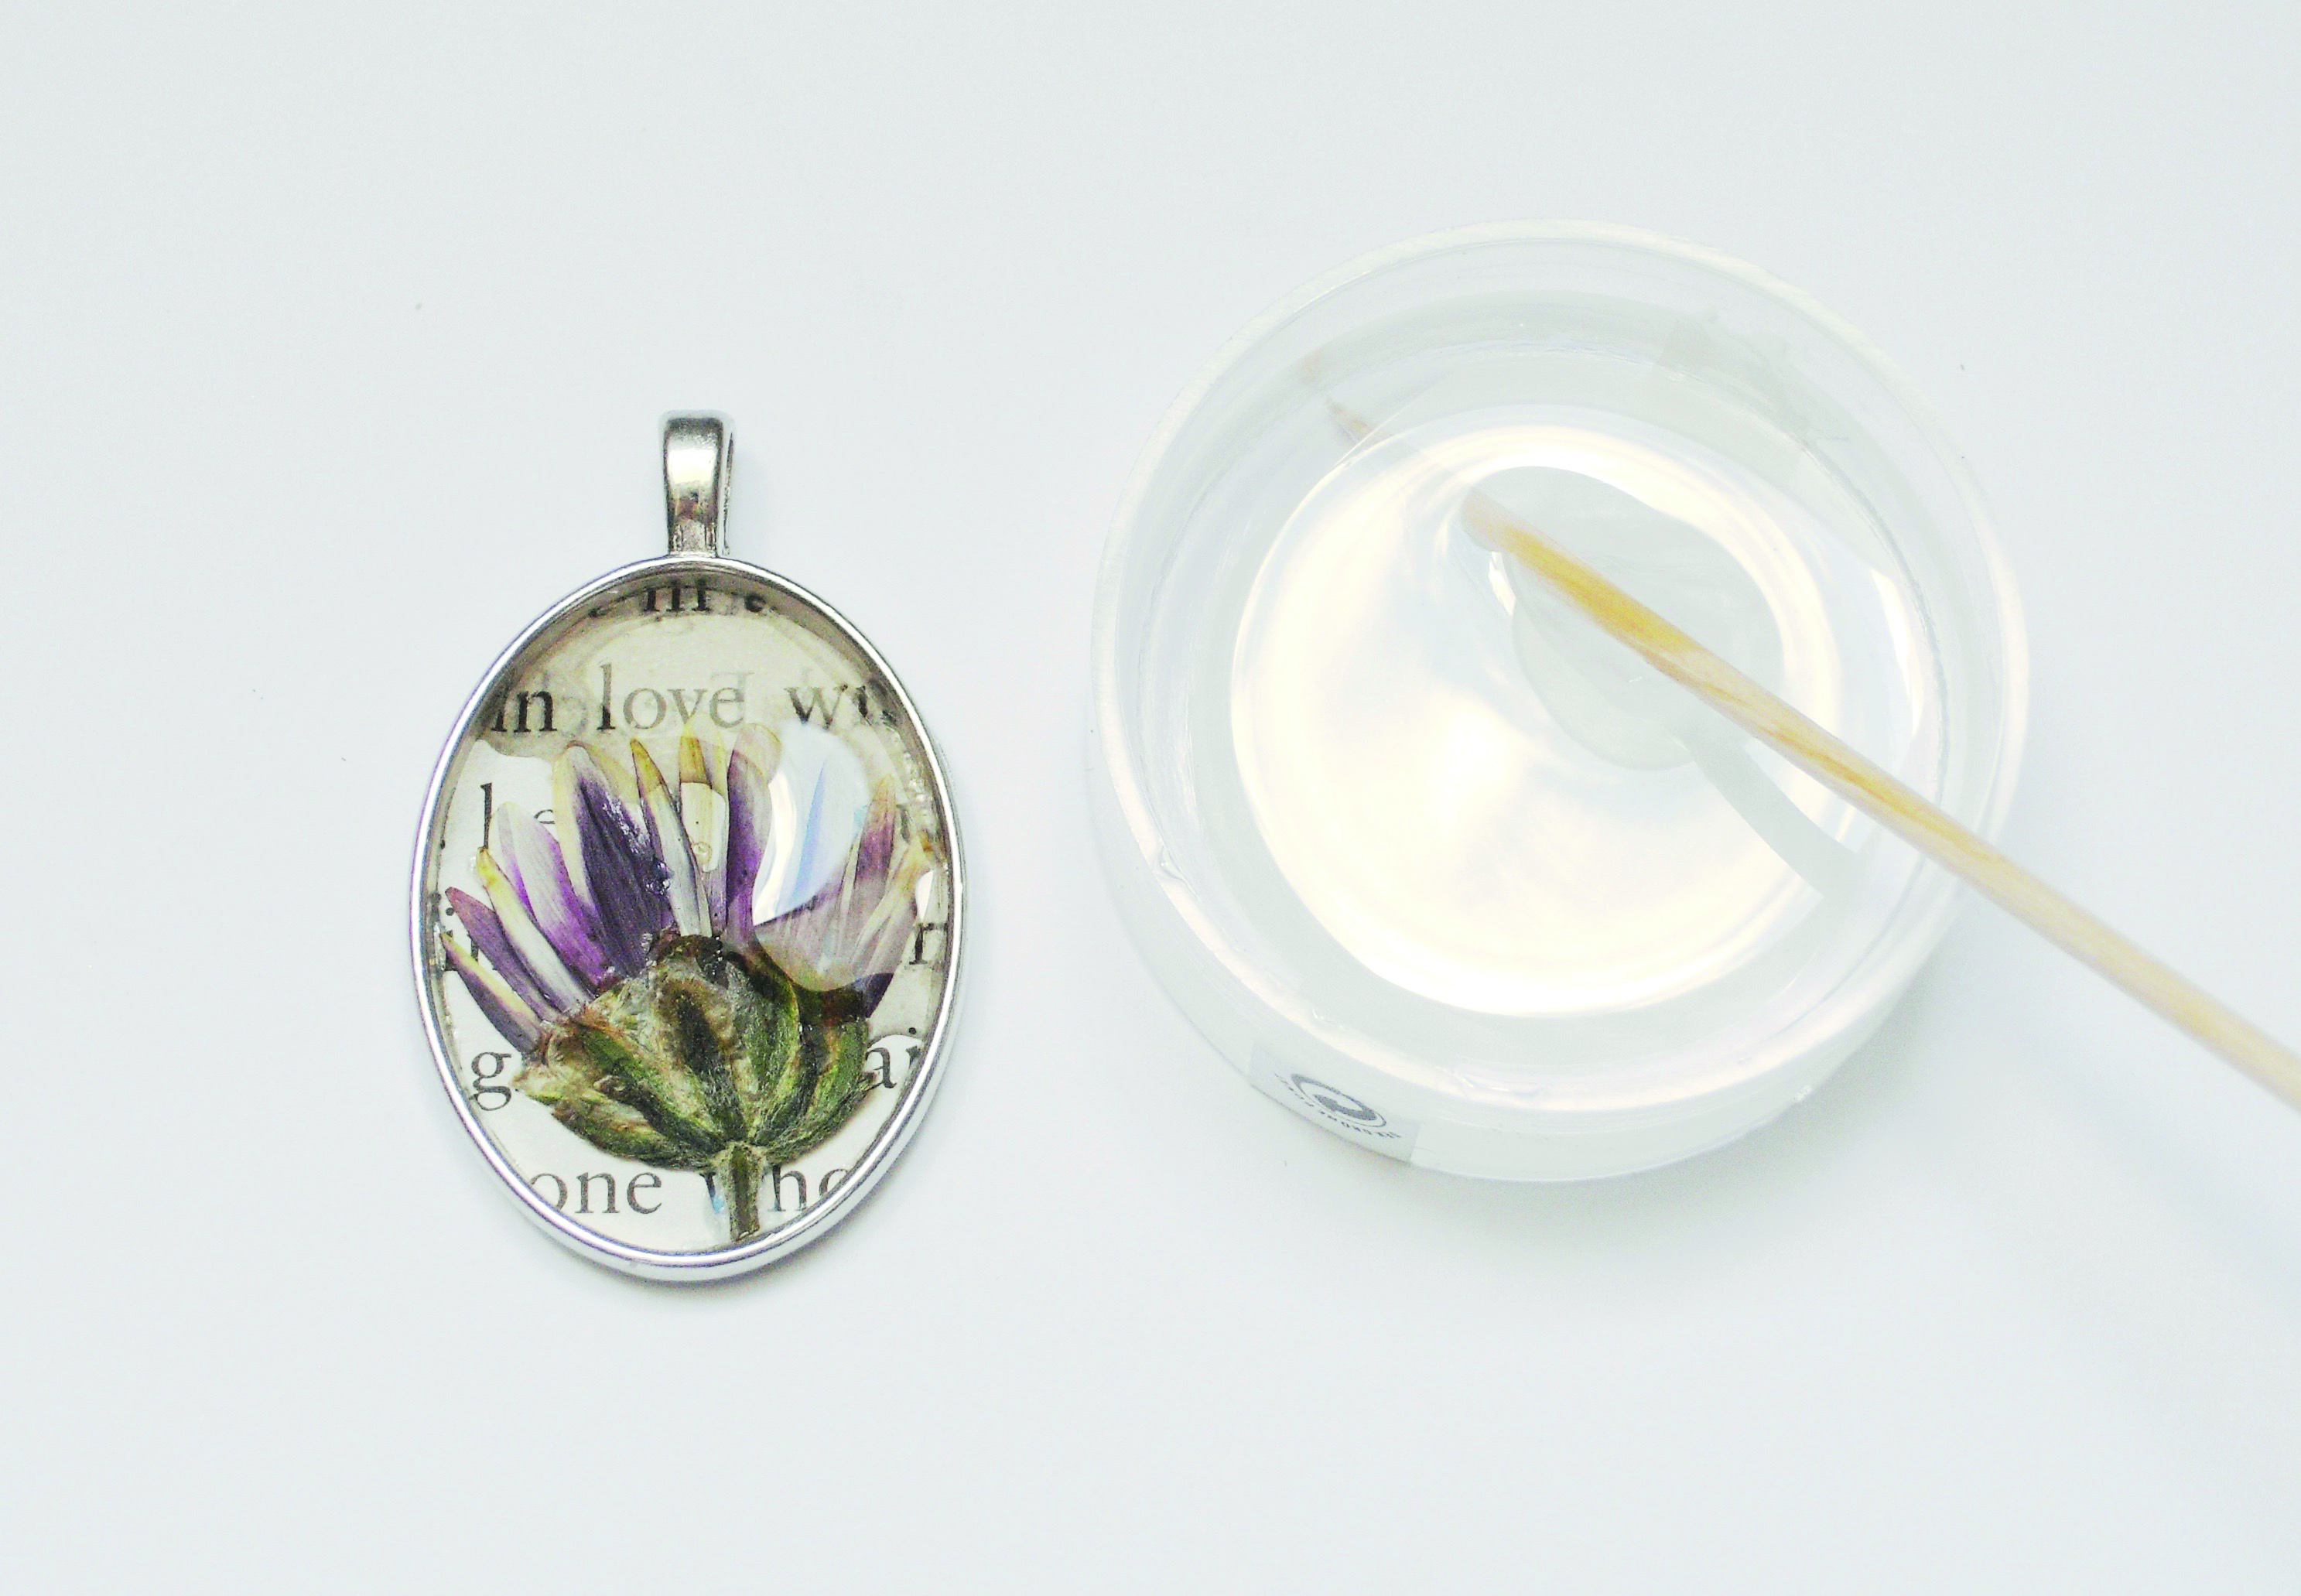 Resin jewelry: How to make a resin necklace